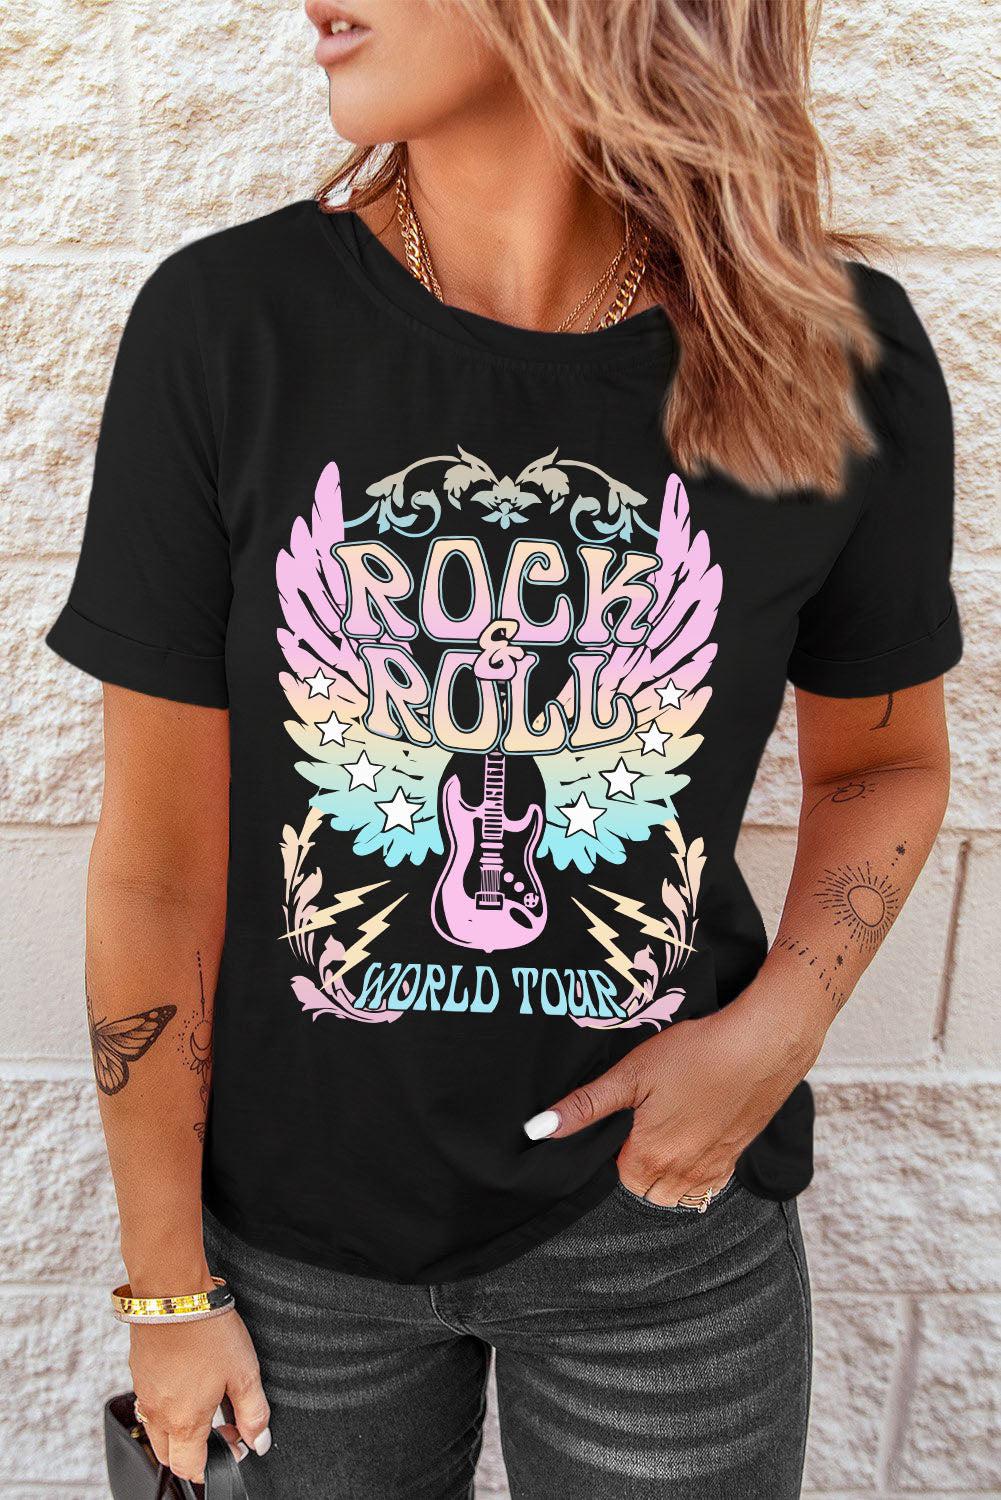 ROCK ROLL Graphic Tee Shirt BLUE ZONE PLANET